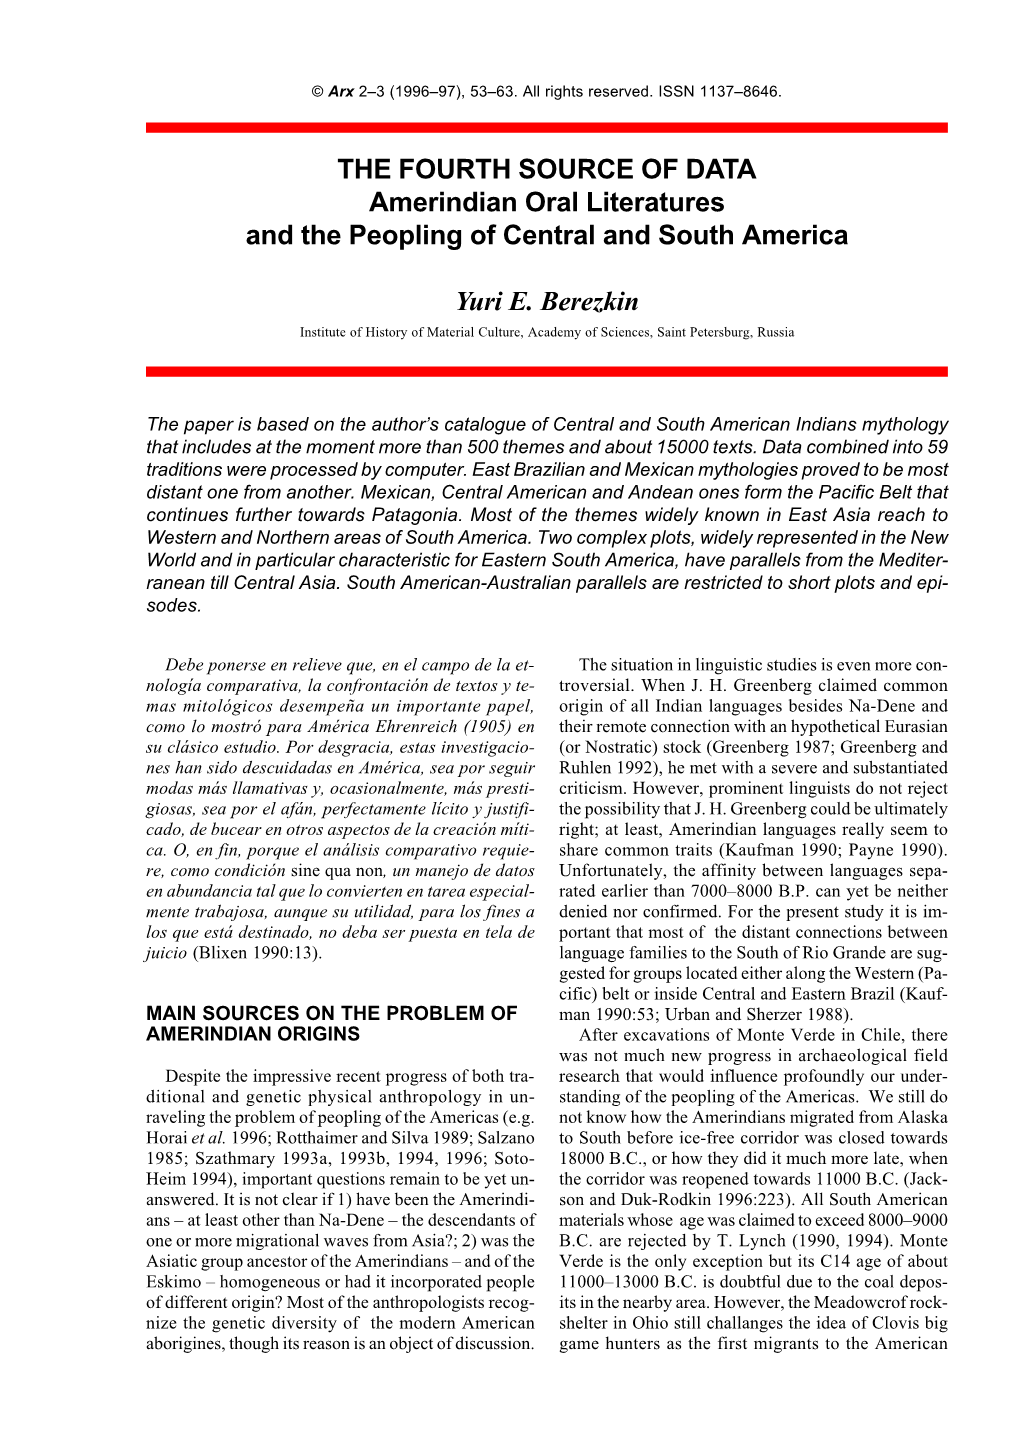 THE FOURTH SOURCE of DATA Amerindian Oral Literatures and the Peopling of Central and South America